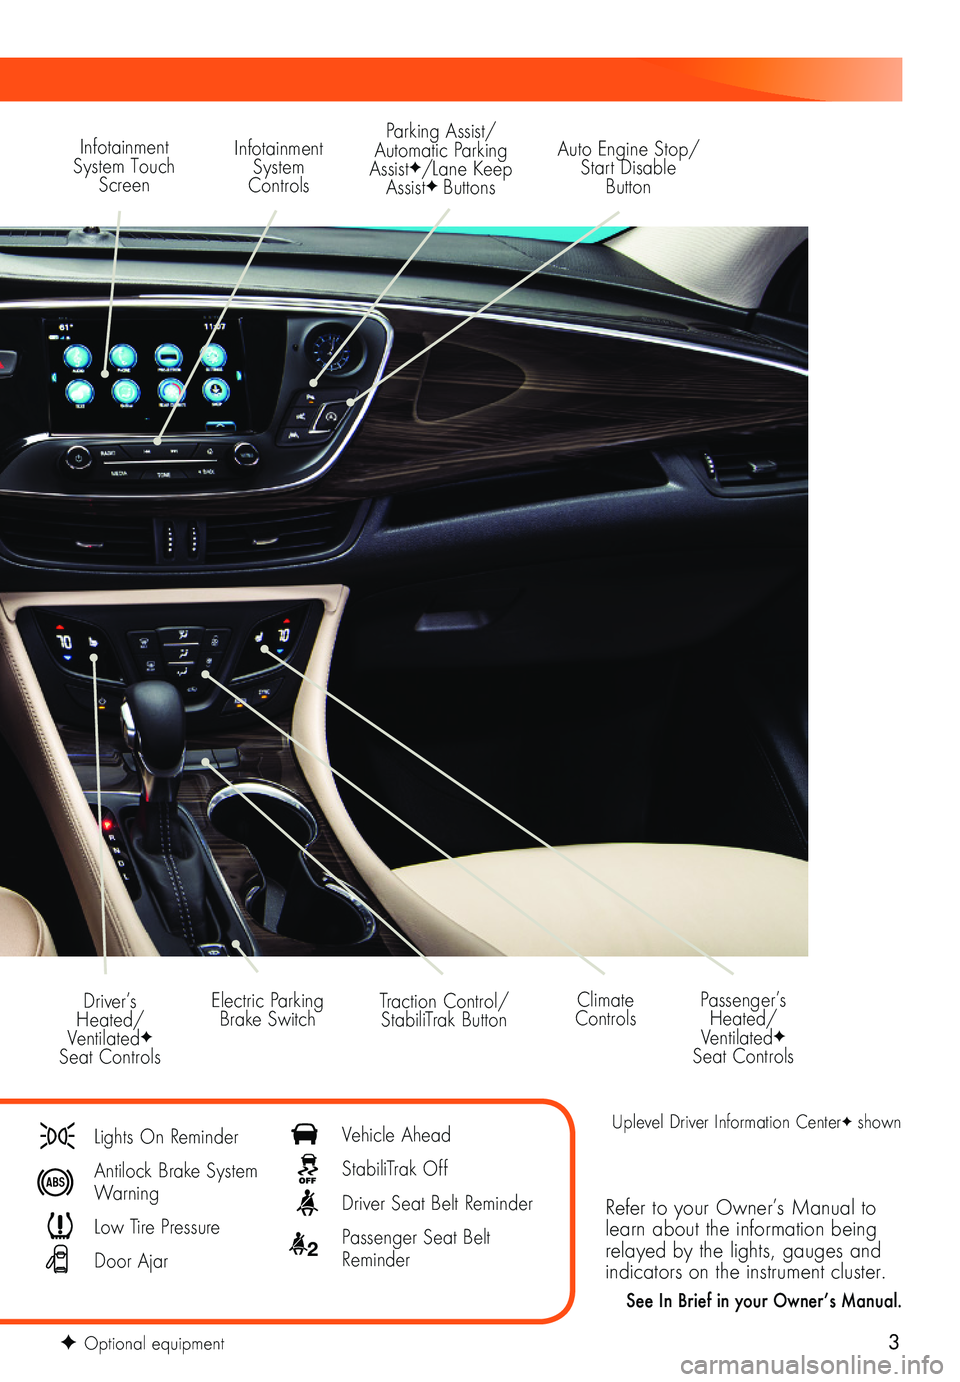 BUICK ENVISION 2019  Get To Know Guide 3
Refer to your Owner’s Manual to learn about the information being relayed by the lights, gauges and indicators on the instrument cluster.
See In Brief in your Owner’s Manual.
Infotainment System